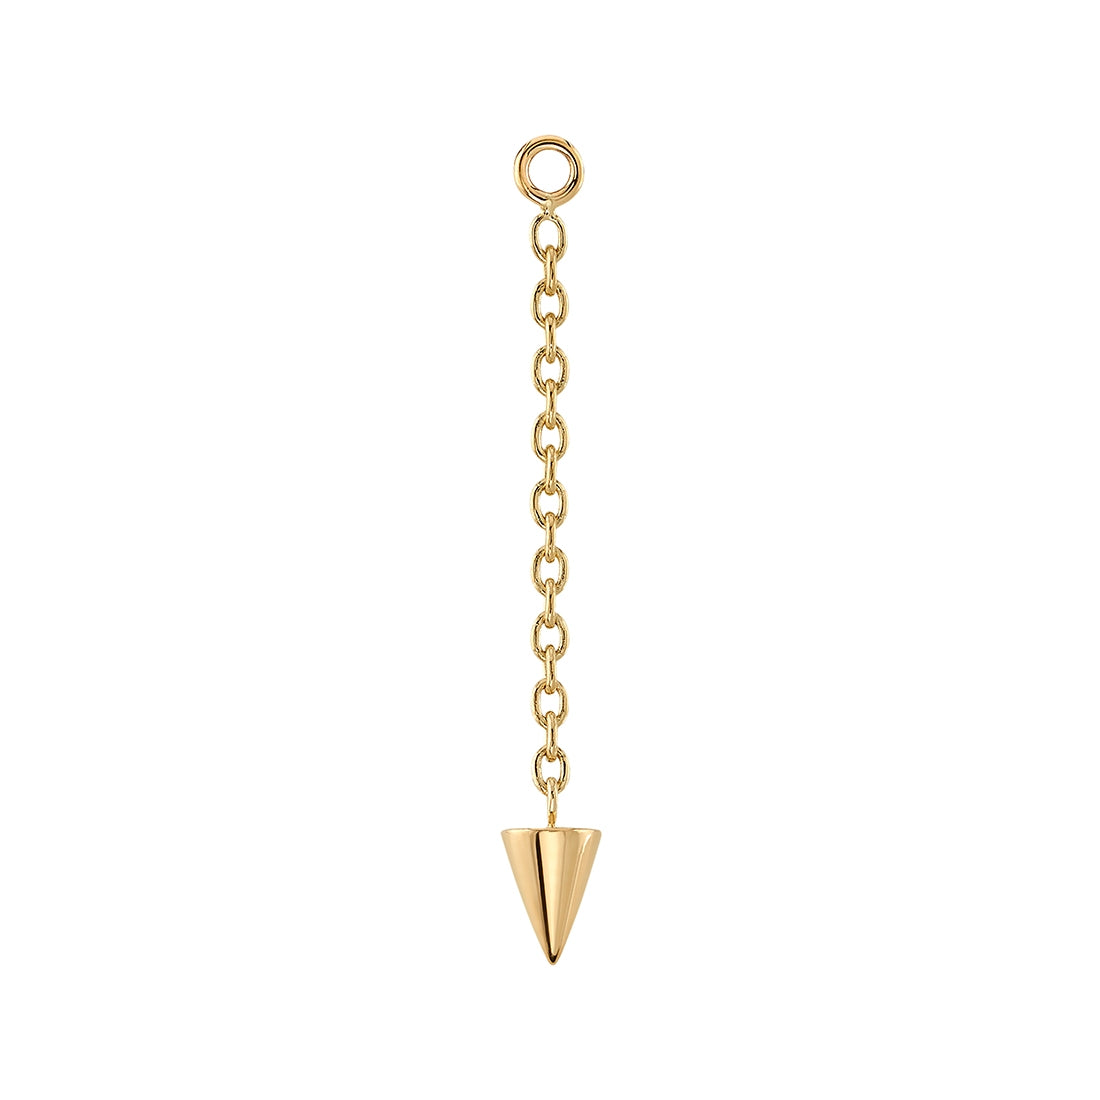 BVLA - SPIKE CHAIN - 14KT SOLID GOLD - CHARM CHAIN